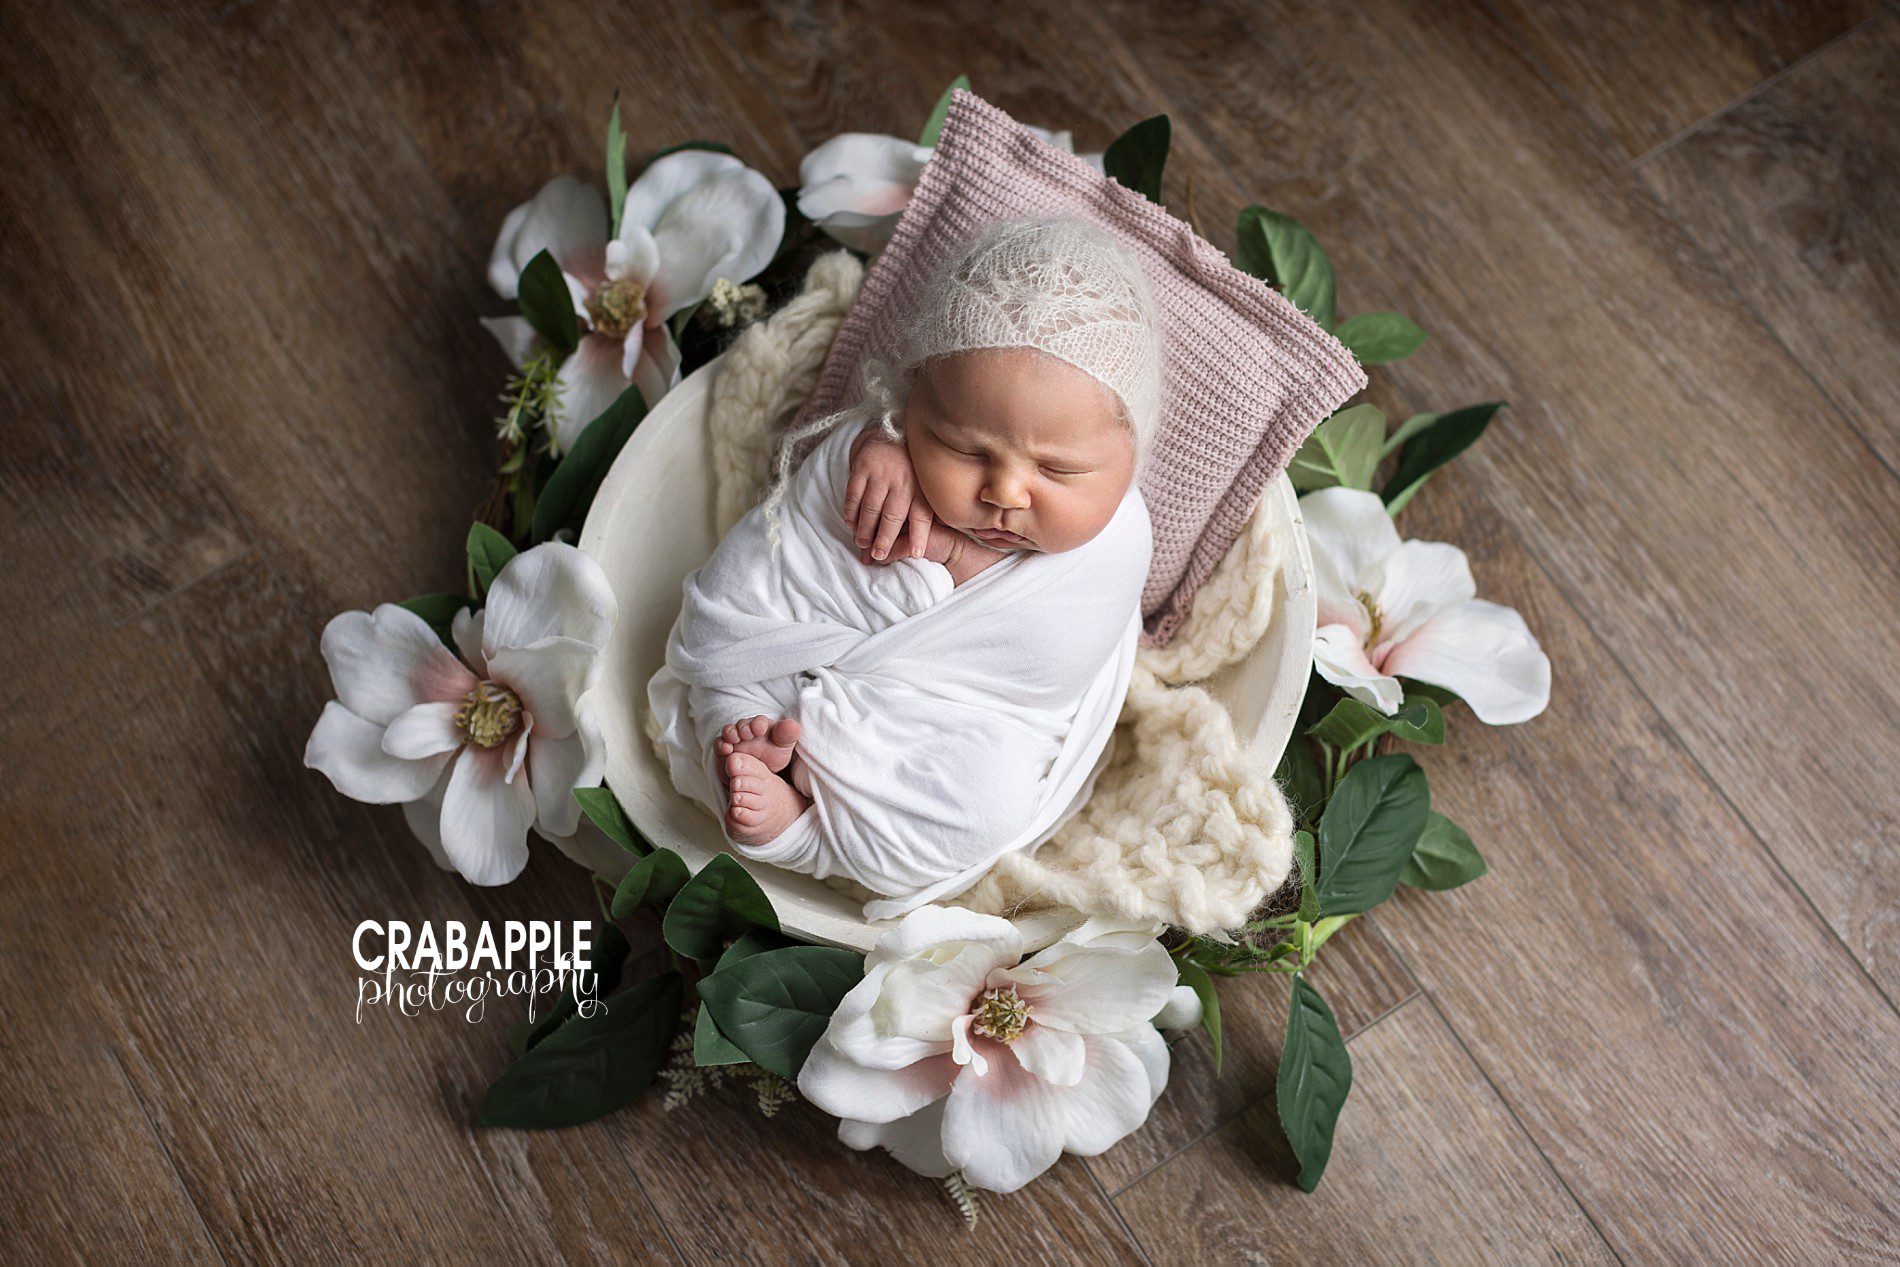 Floral newborn portraits, a baby girl swaddled in white lays in a small white bowl surrounded by faux flowers.